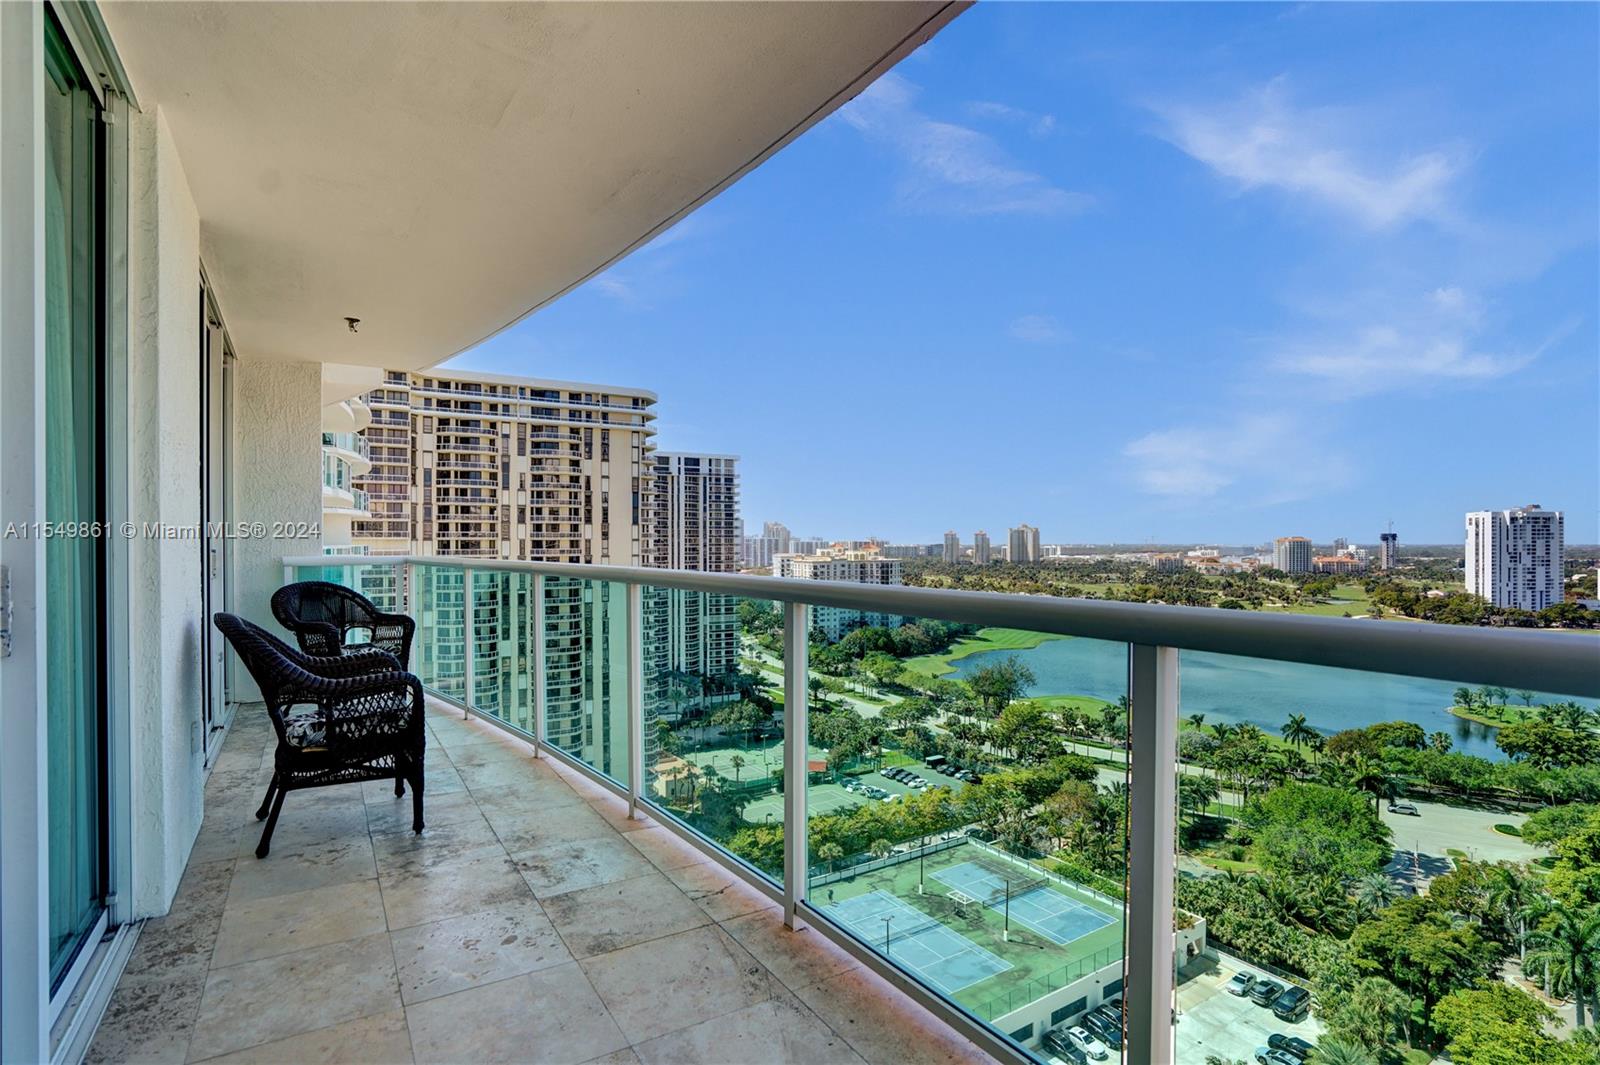 20201 E Country Club Dr Unit 2004, Aventura, Florida, 33180, United States, 2 Bedrooms Bedrooms, ,4 BathroomsBathrooms,Residential,For Sale,20201 E Country Club Dr Unit 2004,1491717